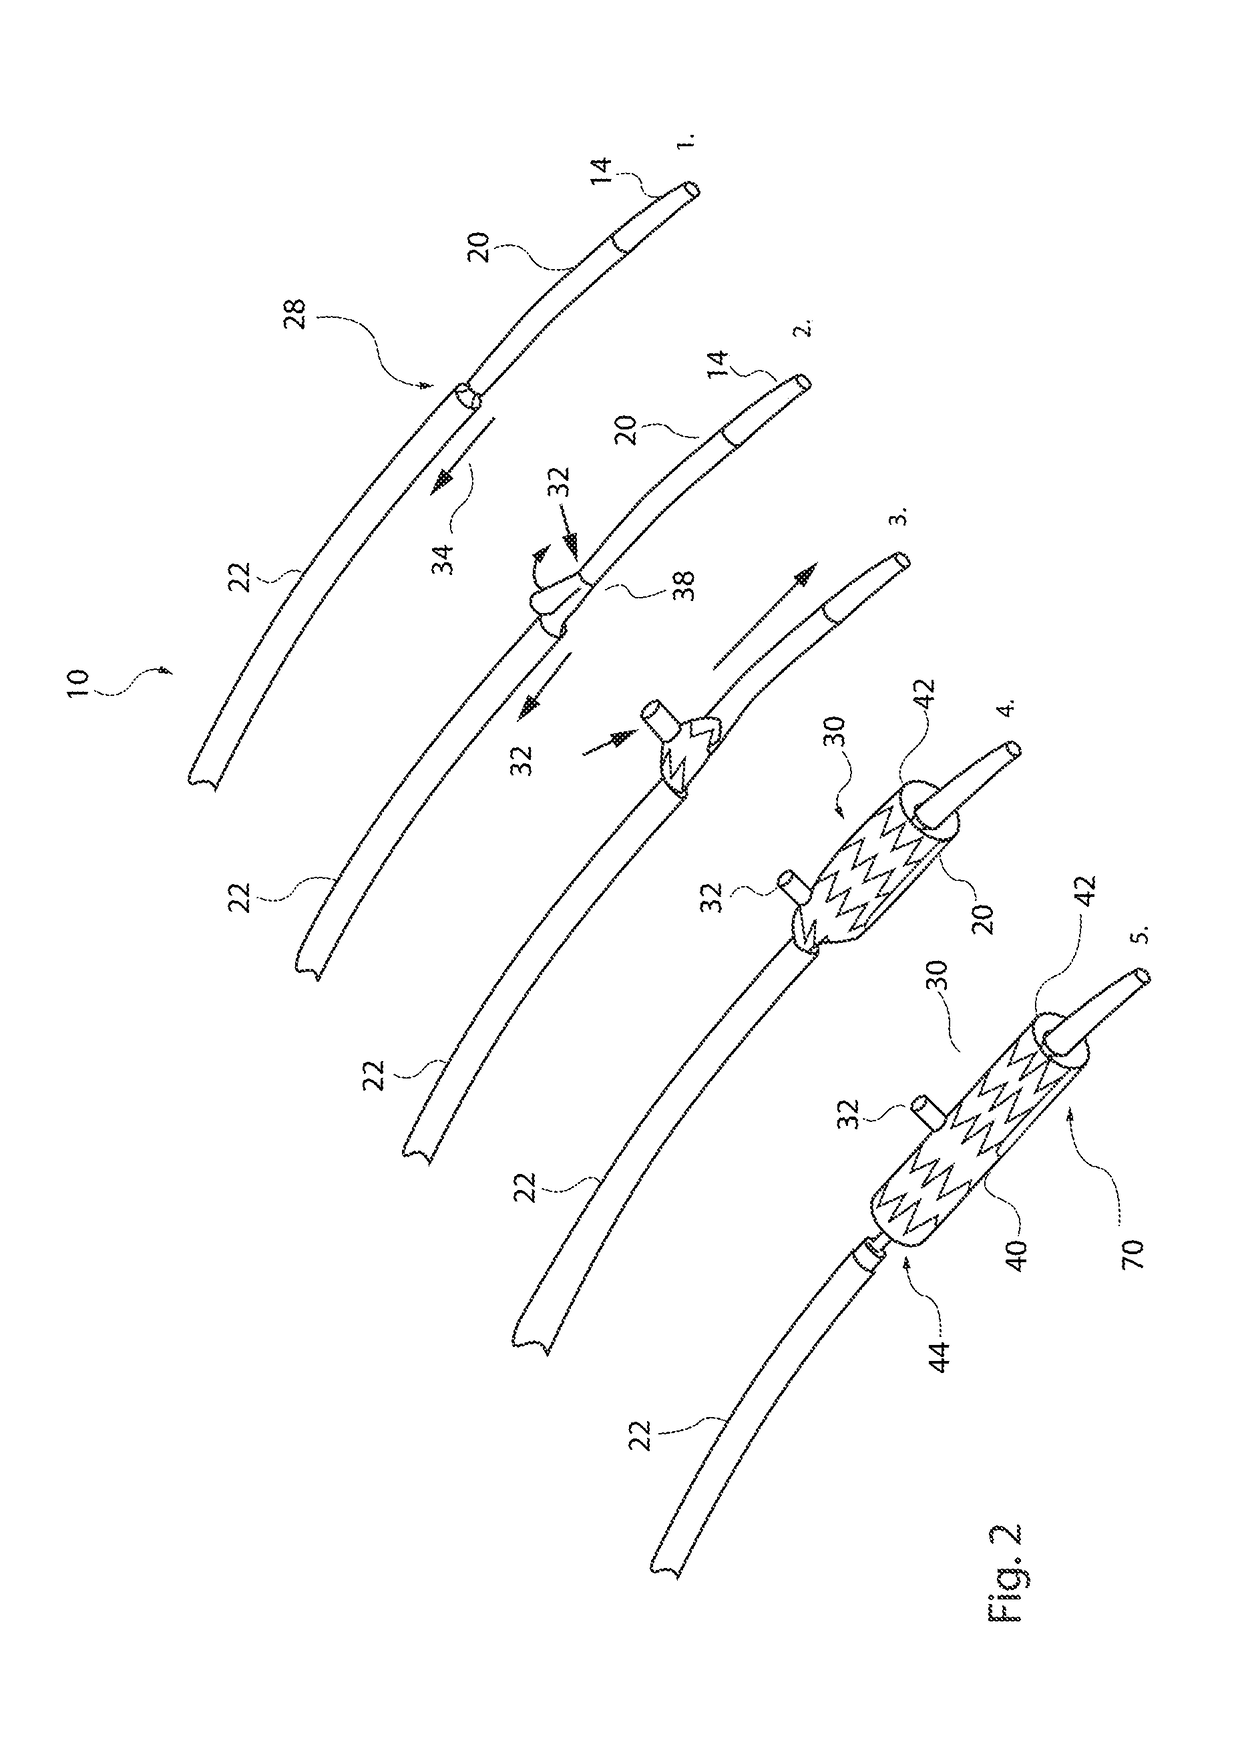 Medical device introducer assembly particularly for branched medical devices